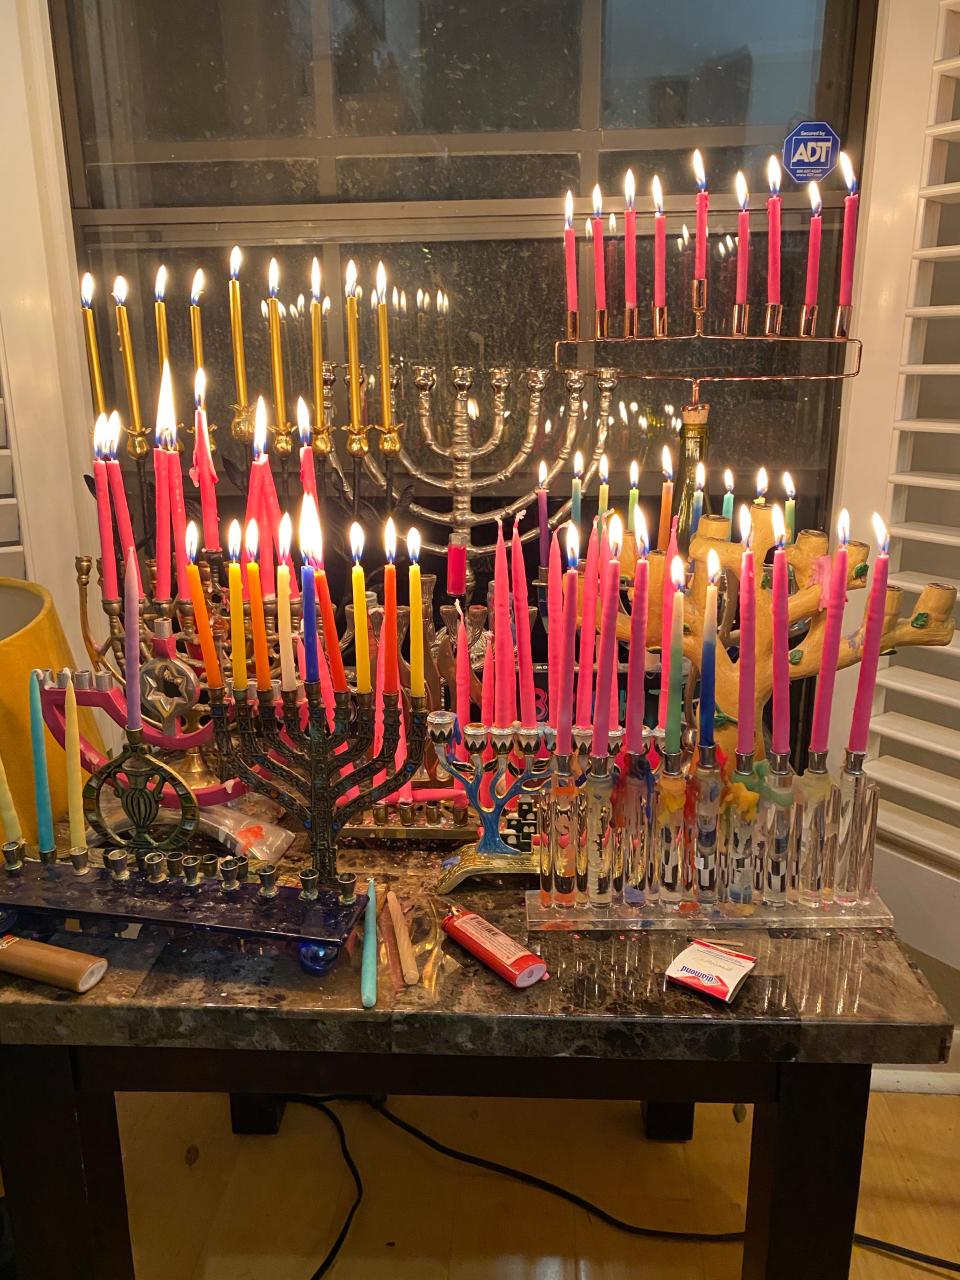 Chris Aguero, the principal of the Austin Jewish Academy, collects hannukiot, or menorahs, and lights them as part of his family's holiday decorations. These menorahs are placed in front of the window as part of the Hanukkah tradition to advertise the miracle the holiday celebrates.